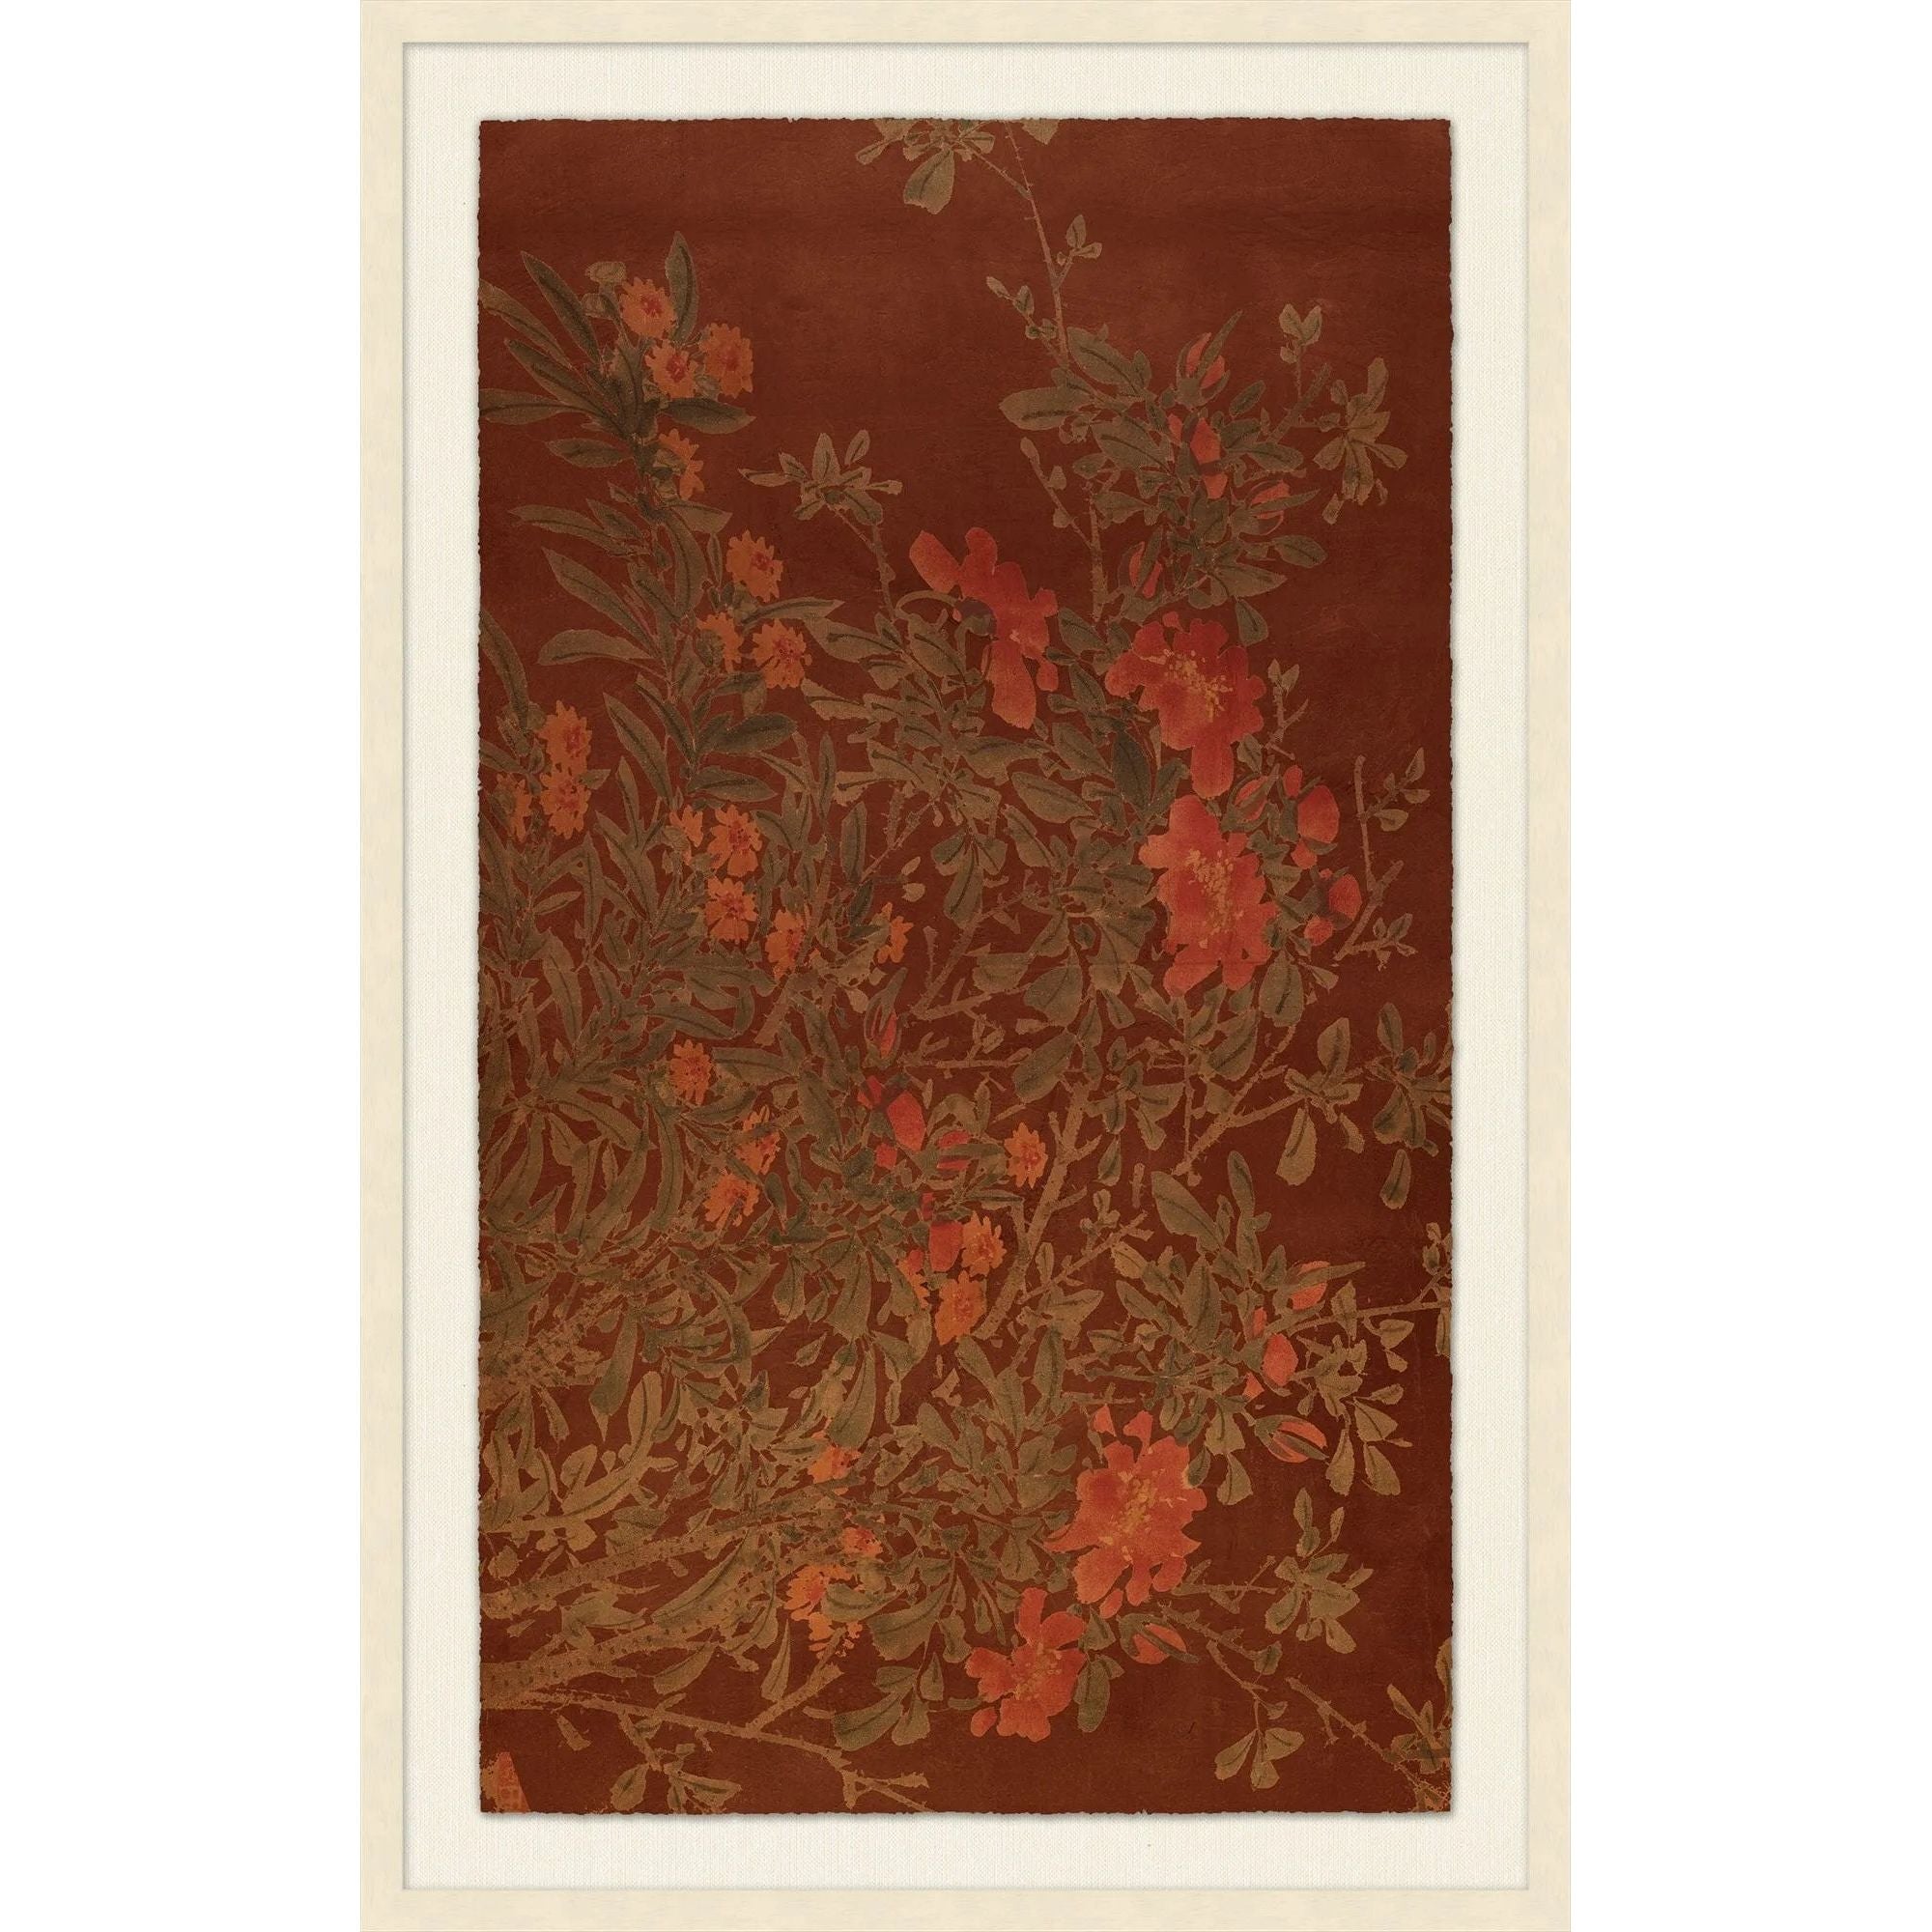 Specialty:  Giclee on Copper Leafed Paper, Single Mat, Hand Applied Copper Leafin Amethyst Home provides interior design, new home construction design consulting, vintage area rugs, and lighting in the Salt Lake City metro area.